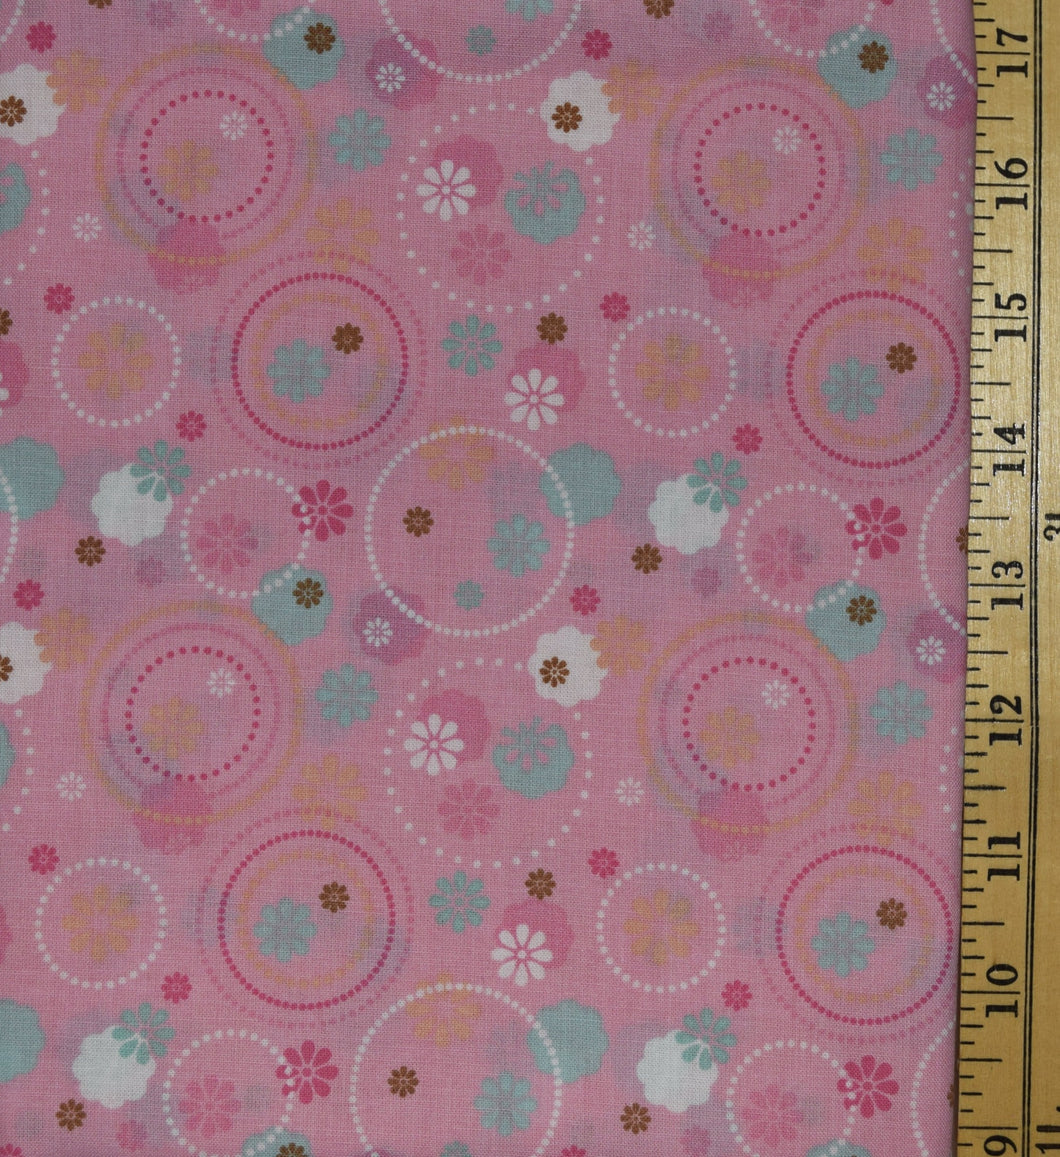 Circles drawn with dots in two shades of pink and white with small blossoms in teal, white, brown, pink, and yellow scattered overlapping over fabric.